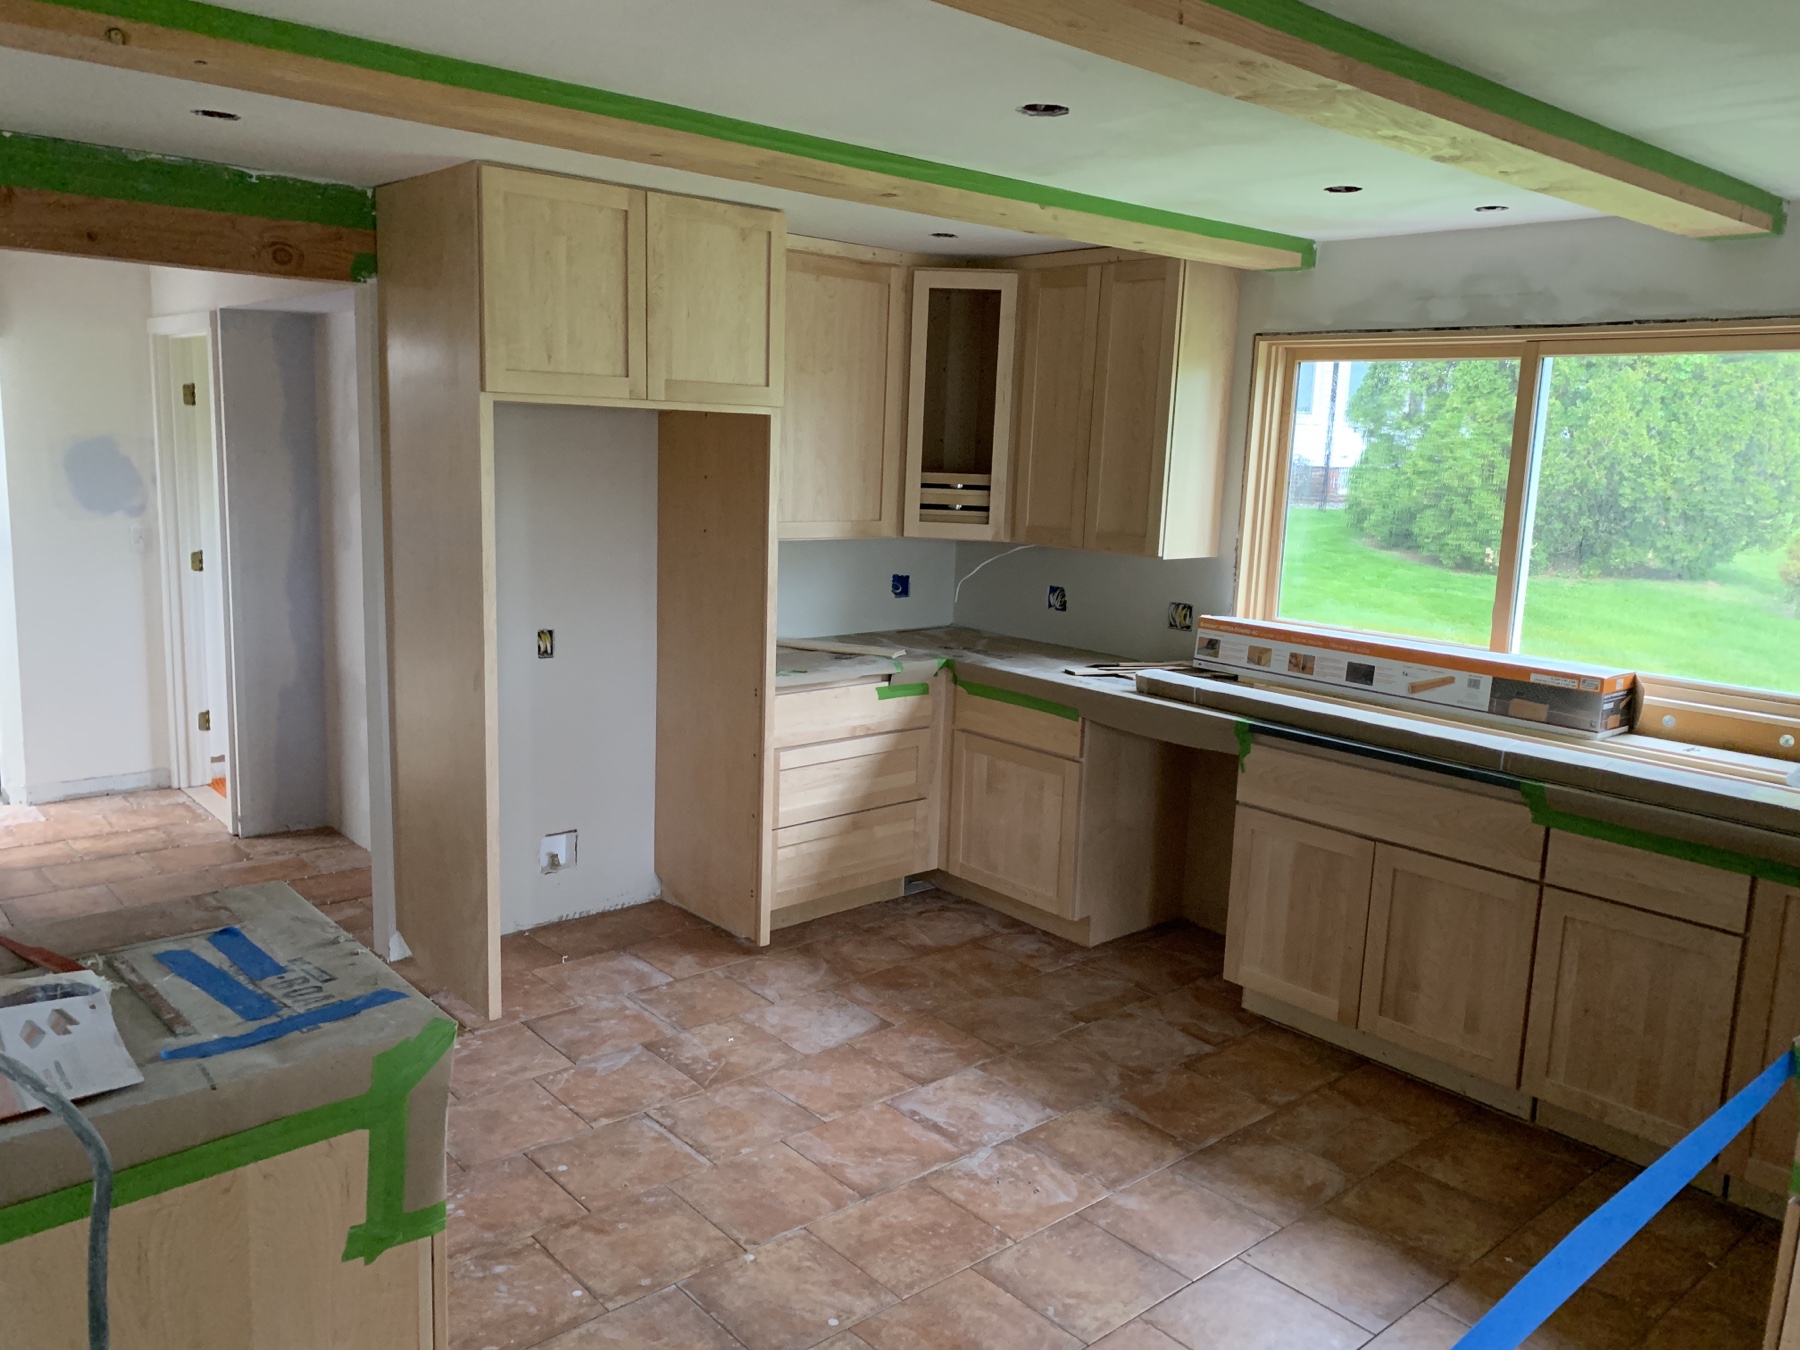 kitchen with tile and cabinets showing